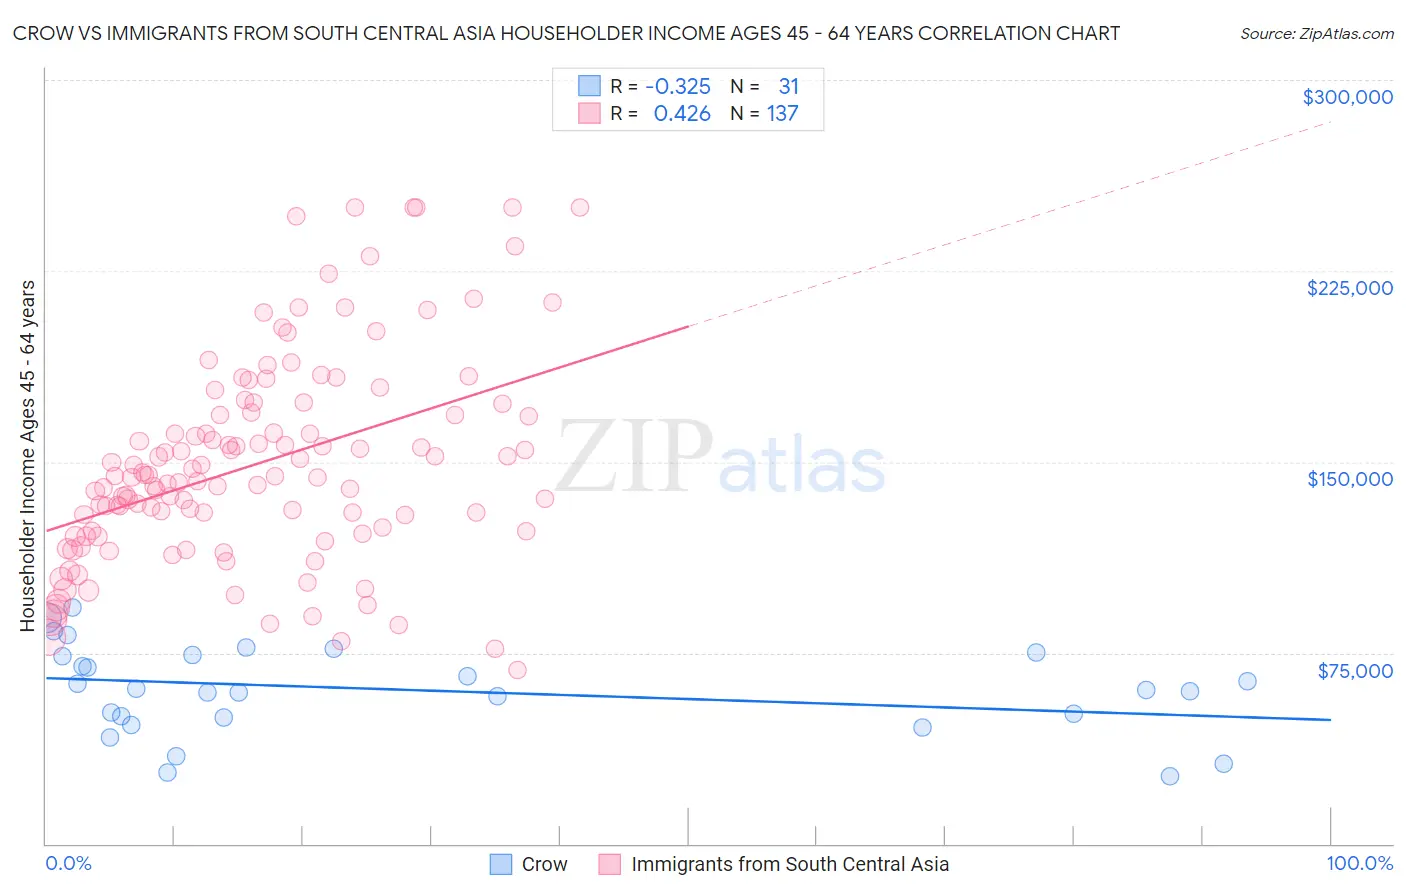 Crow vs Immigrants from South Central Asia Householder Income Ages 45 - 64 years